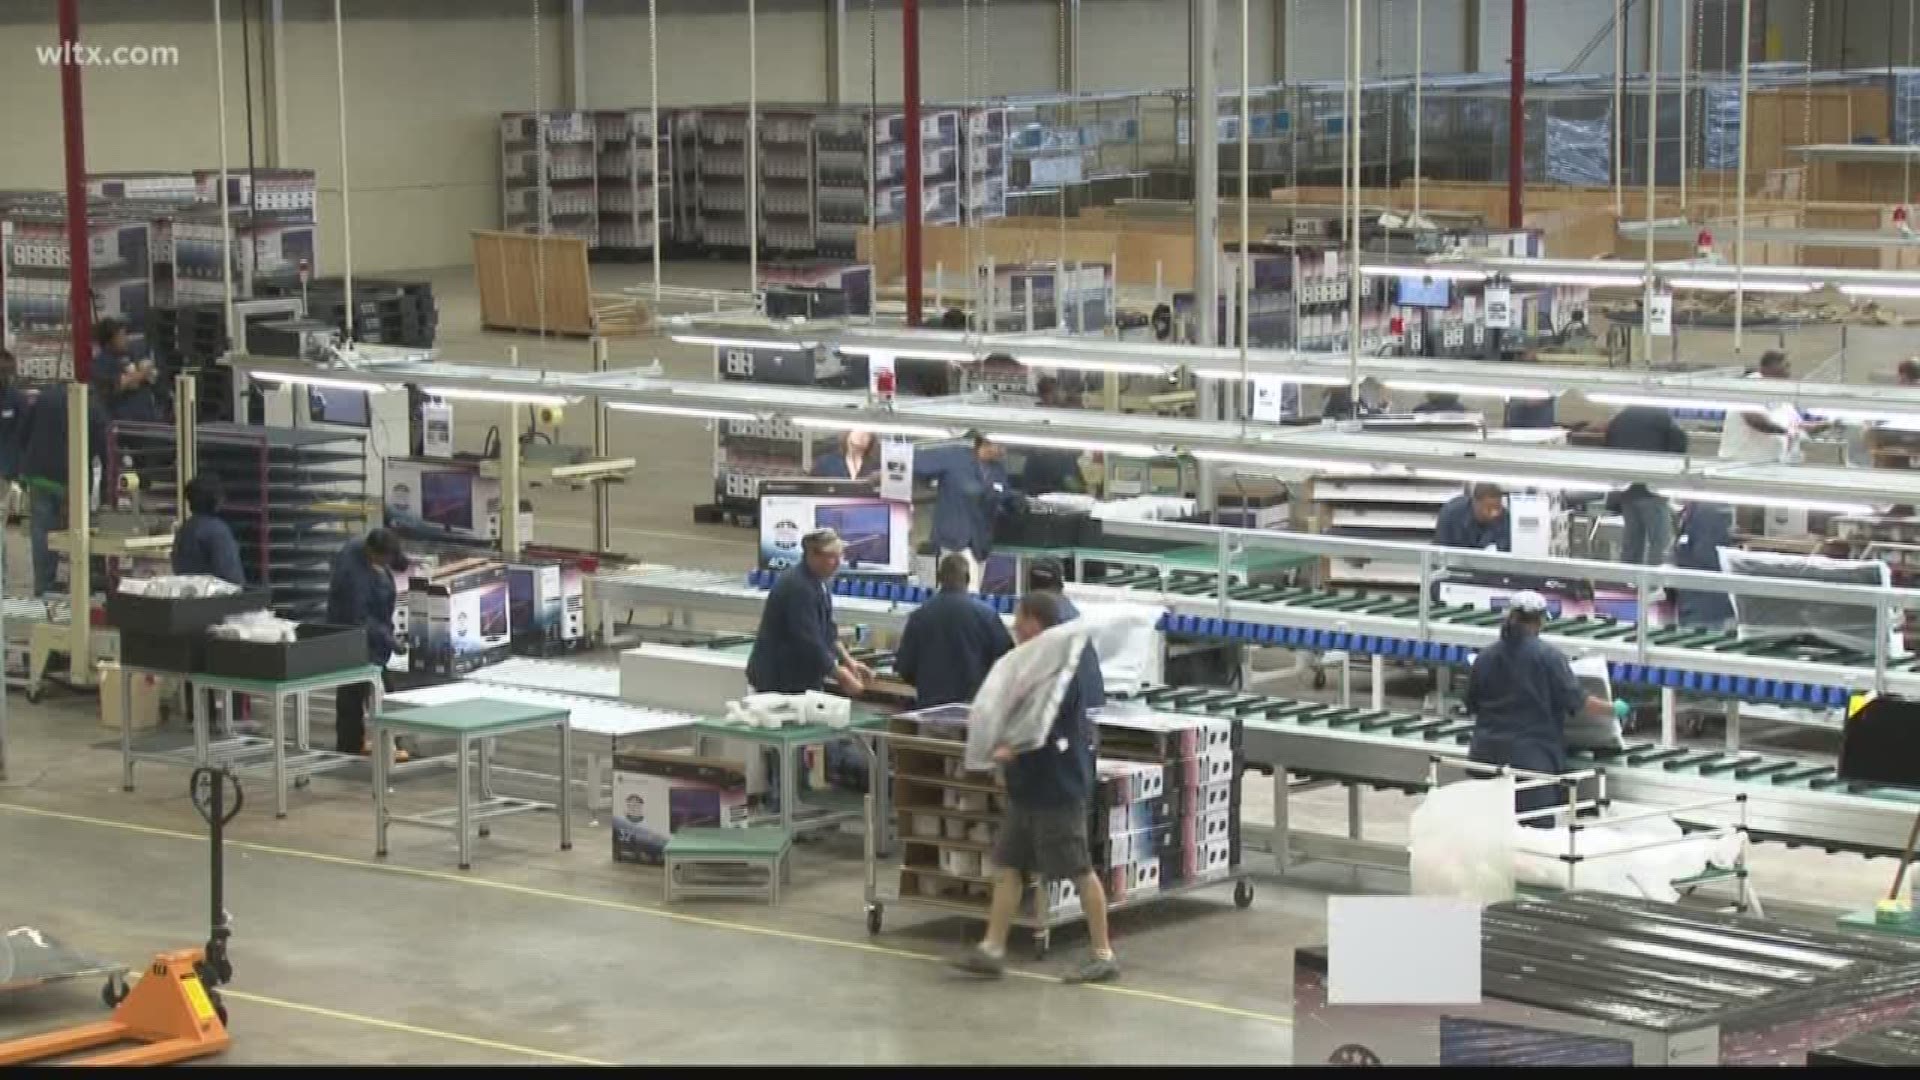 The July 6 tariffs may lead to layoffs at a Element Electronics in Winnsboro.  